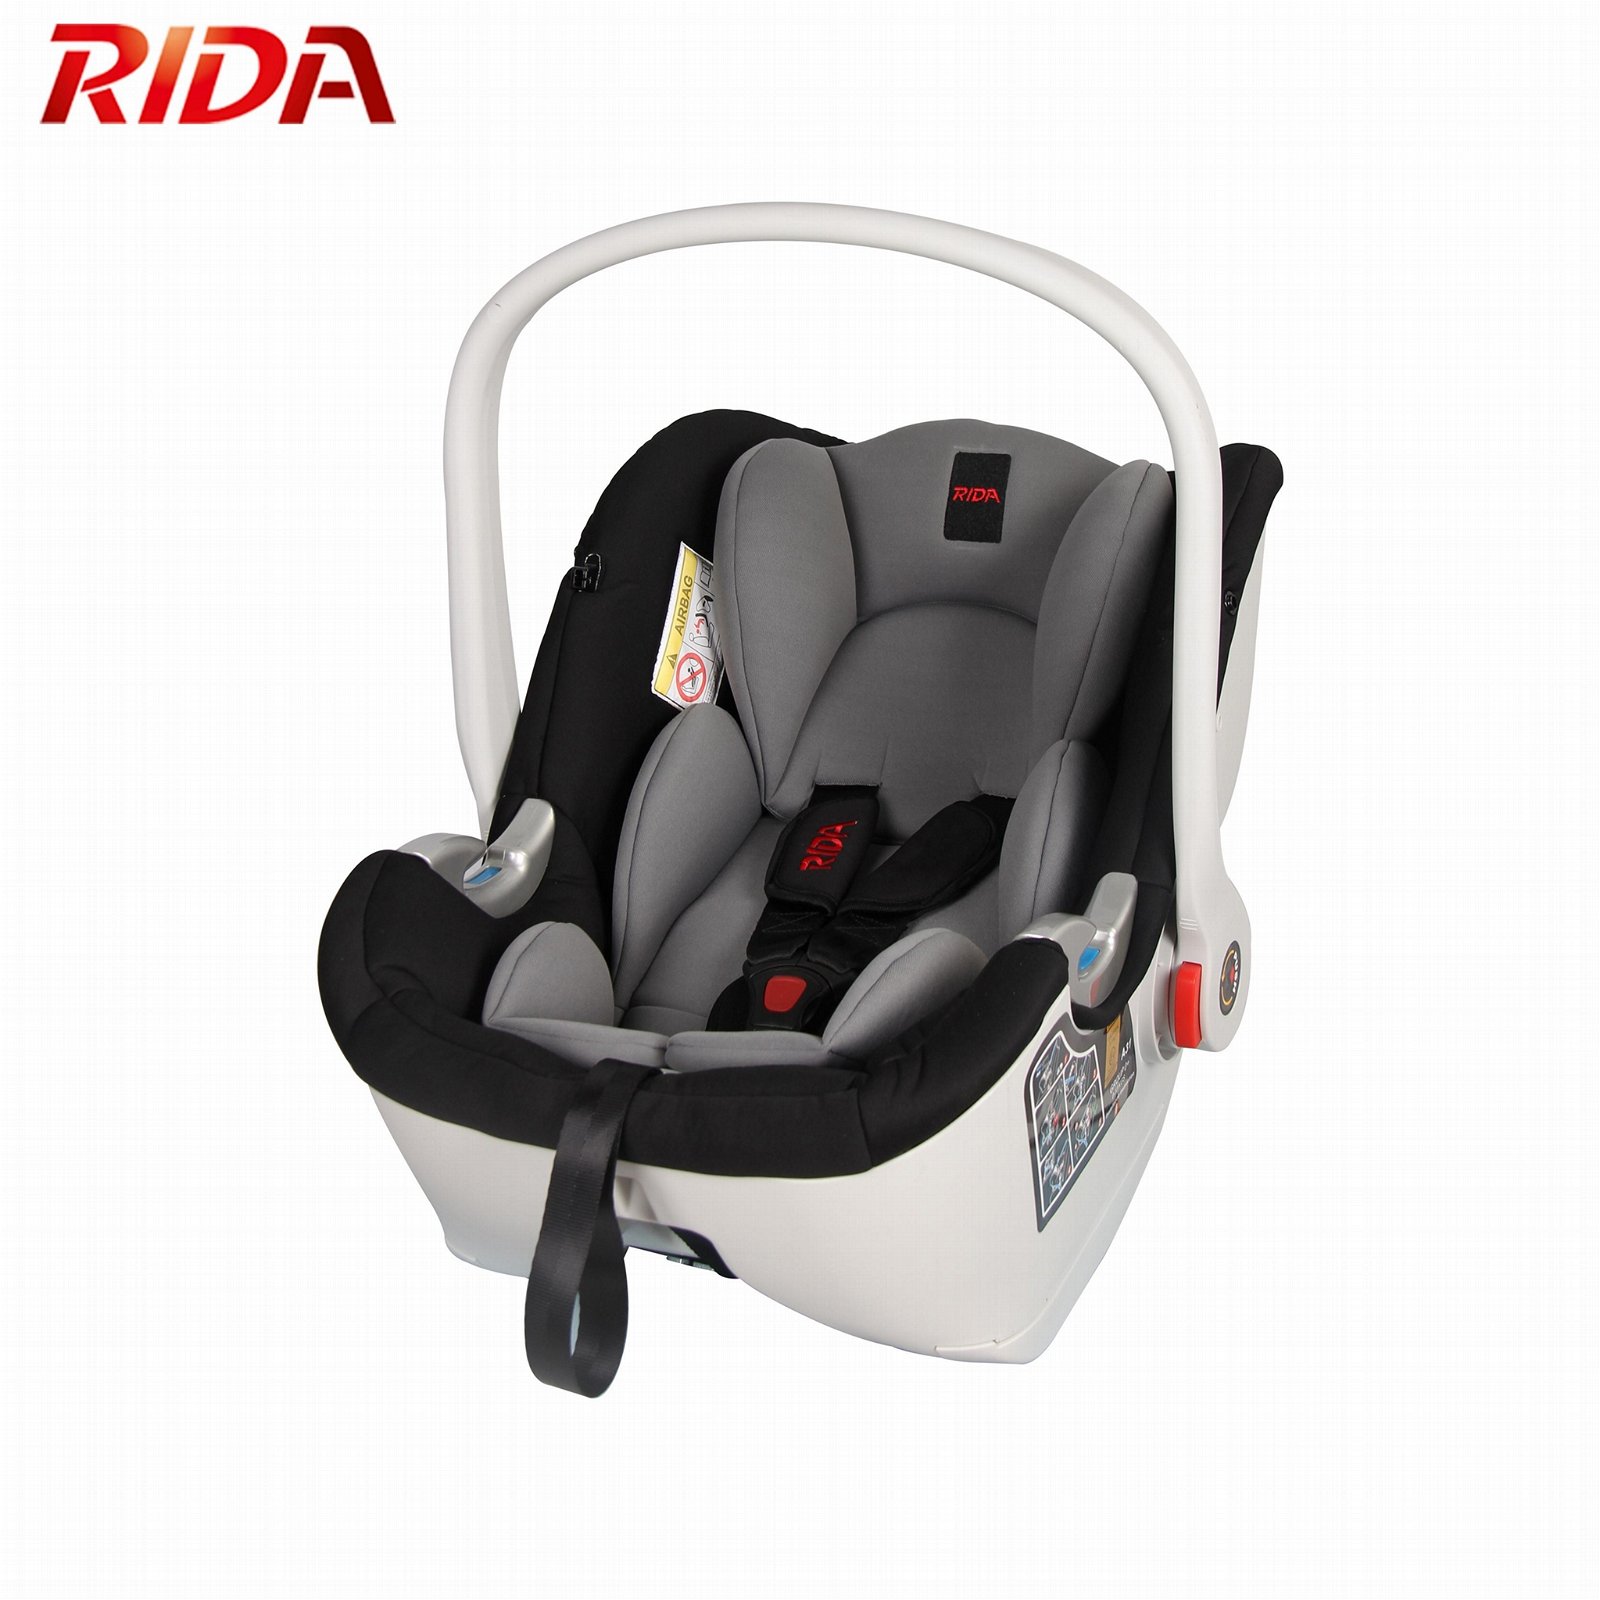 Stronger side protection group 0+ child isofix car seat baby  1